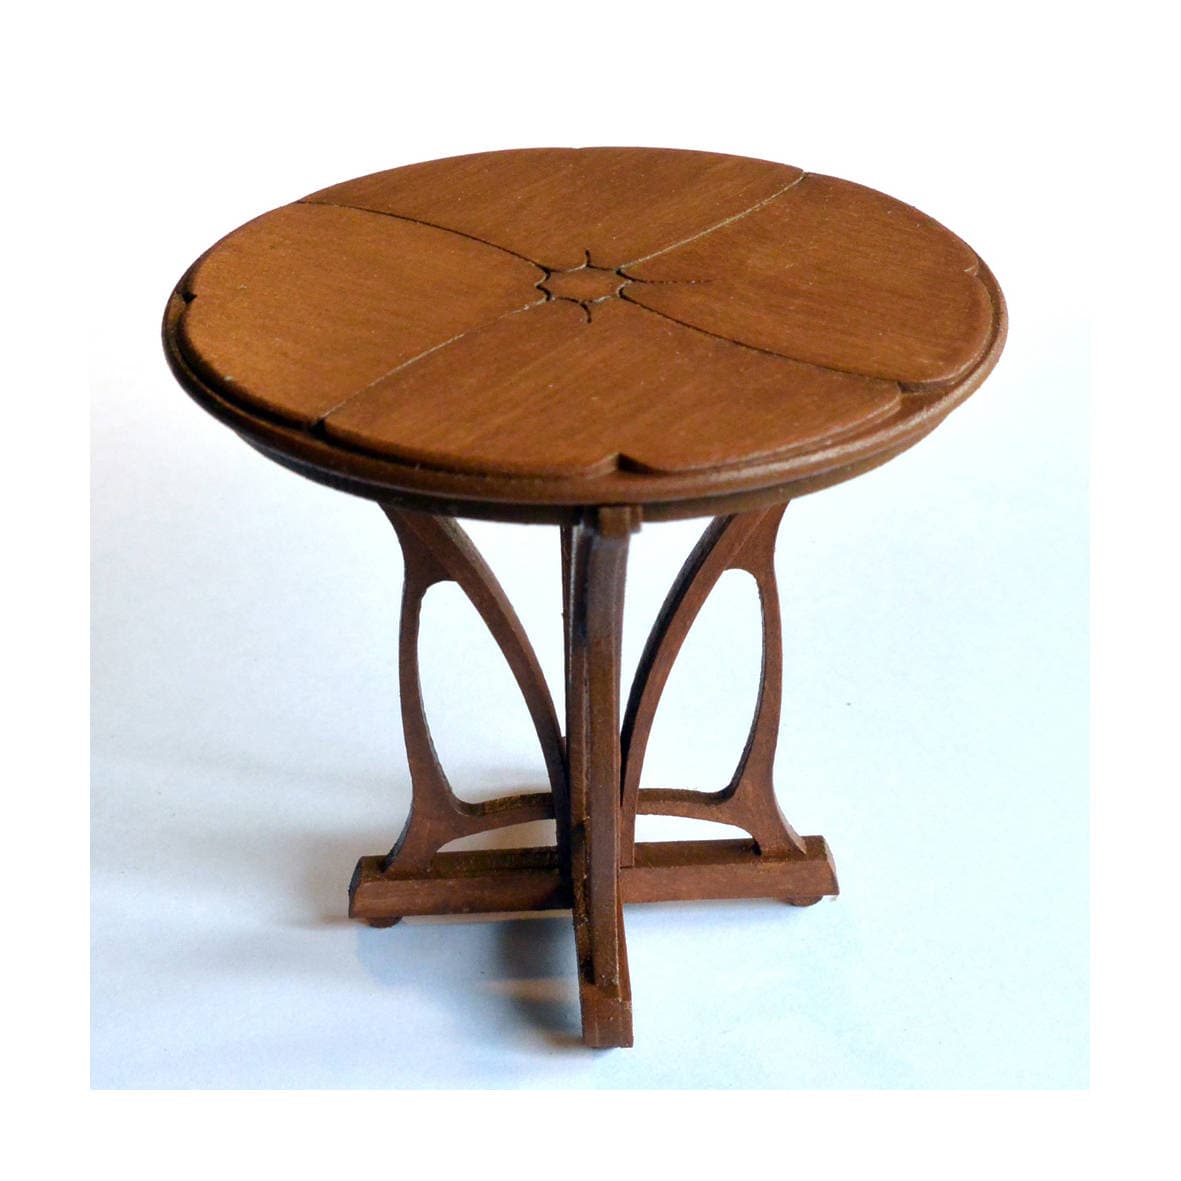 Dollhouse Miniature Hand Carved Round Oak Table for sale online 